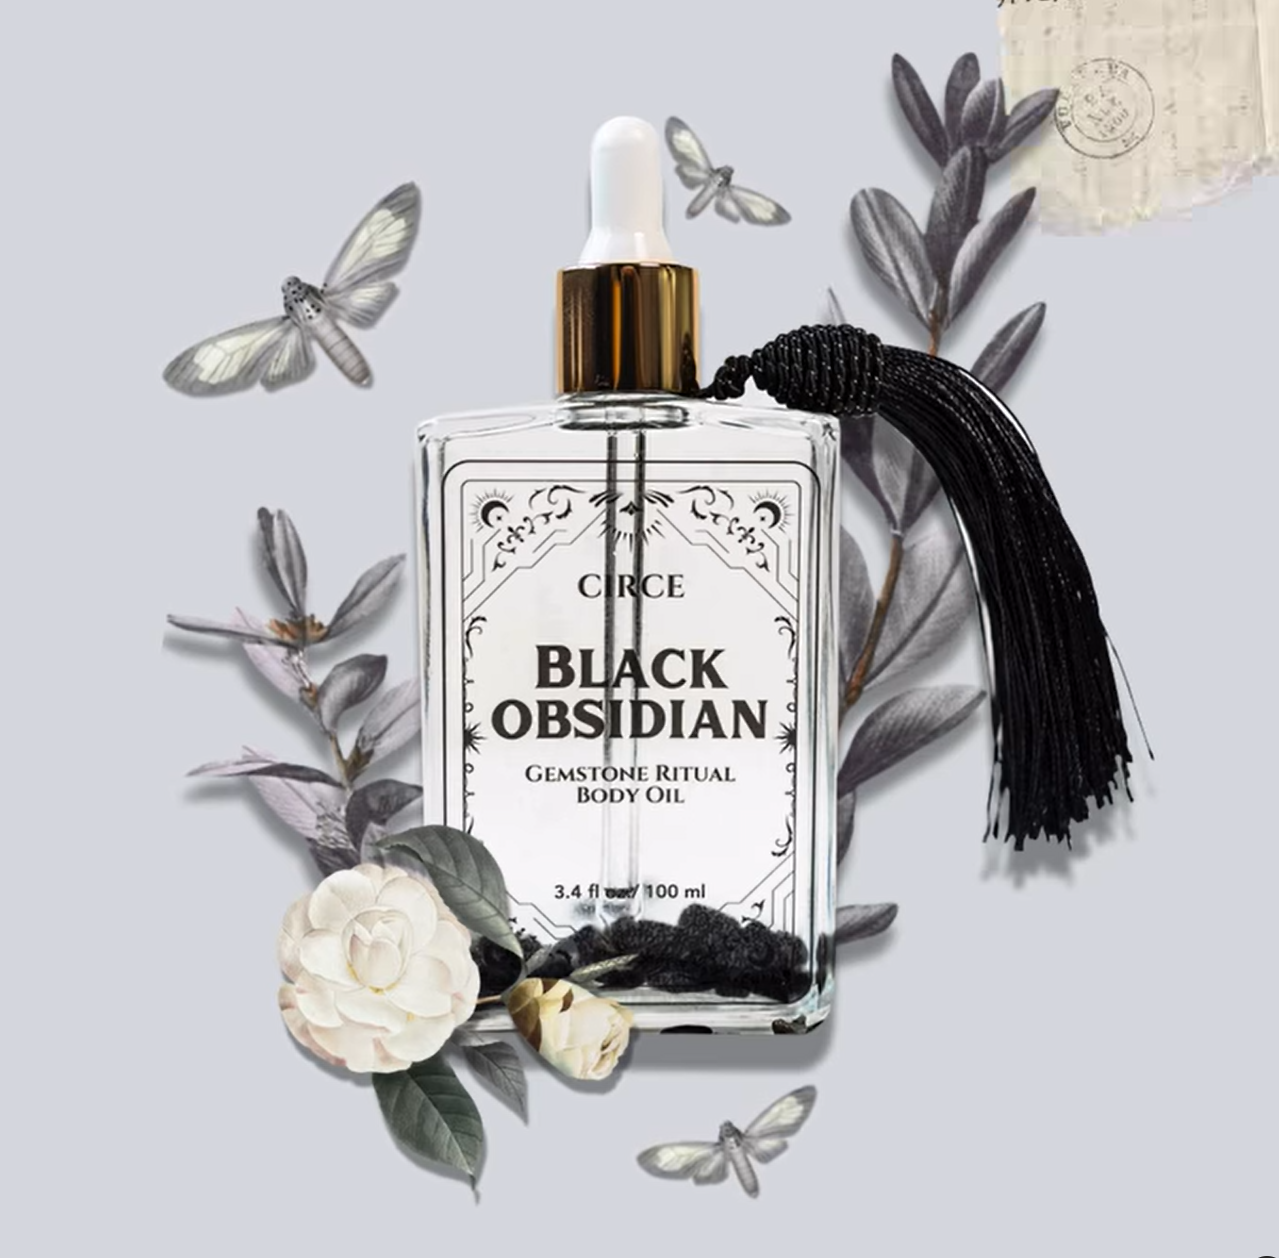 Black Obsidian Gemstone Body Oil  from Circe Boutique